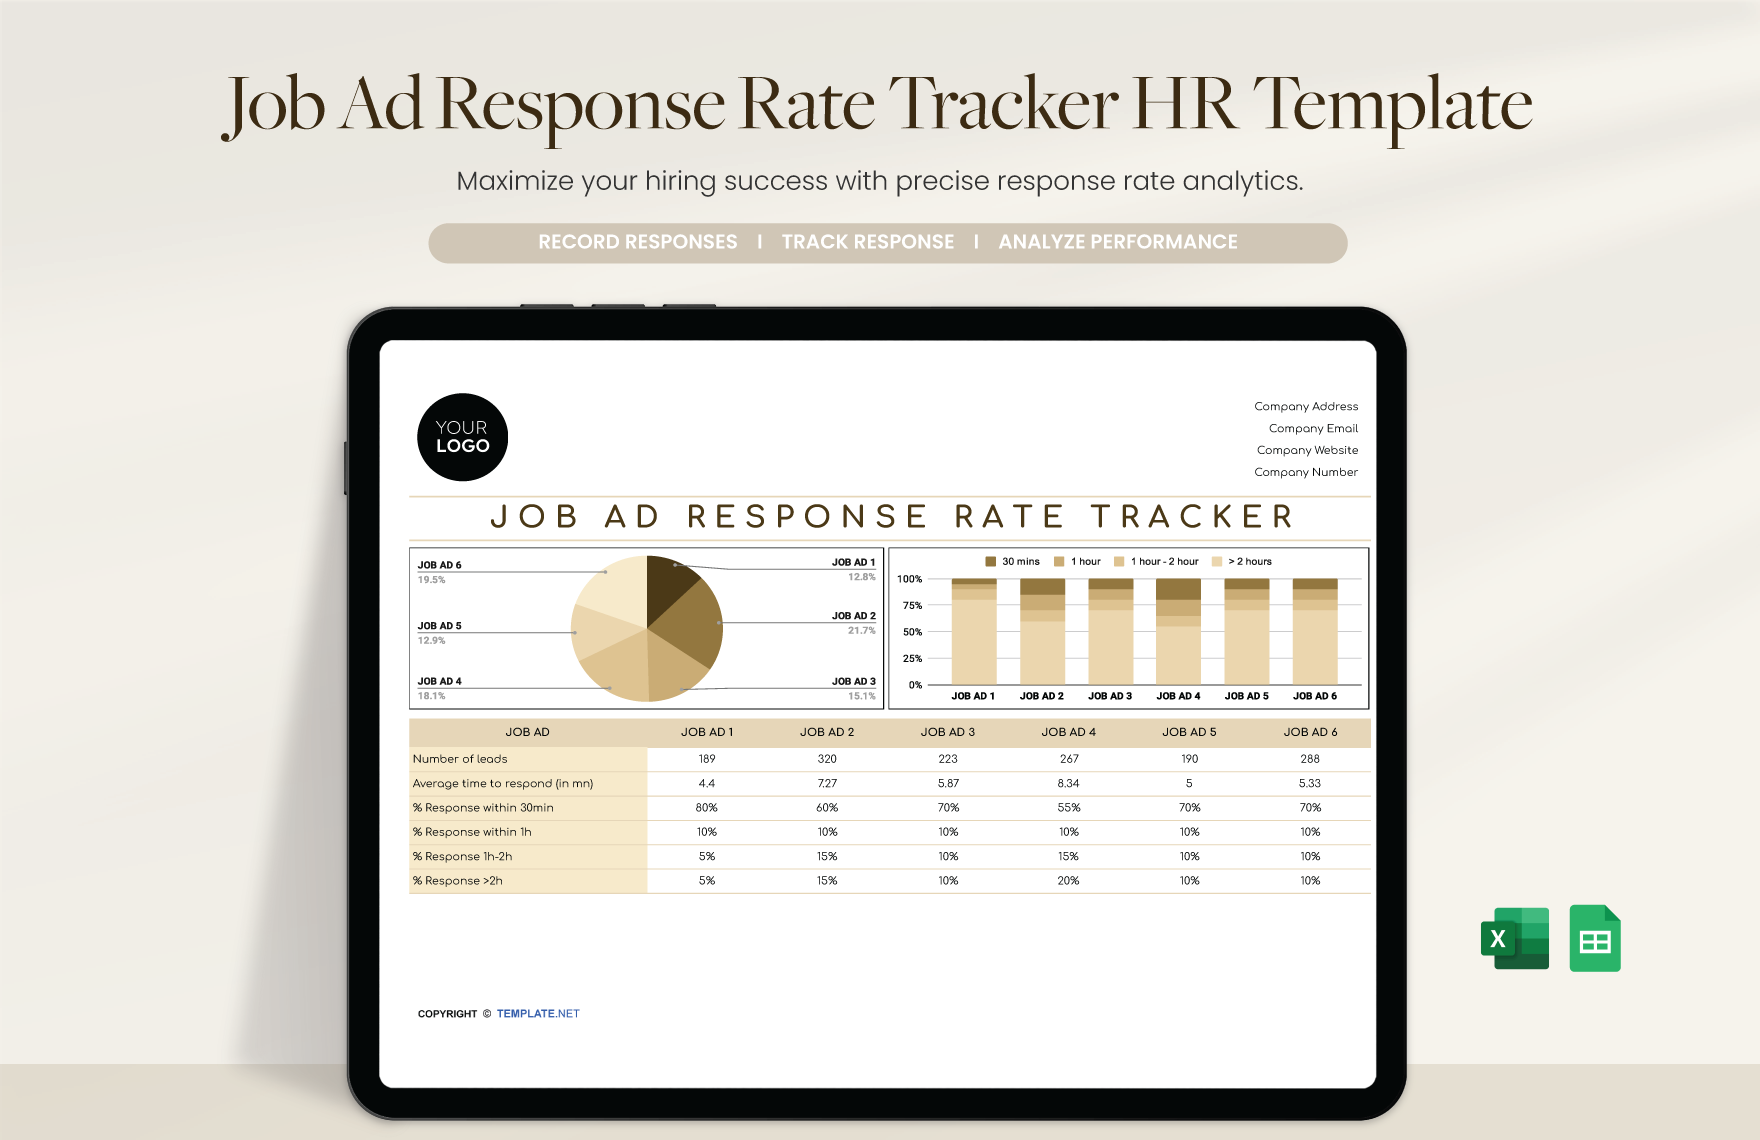 Free Job Ad Response Rate Tracker HR Template in Excel, Google Sheets